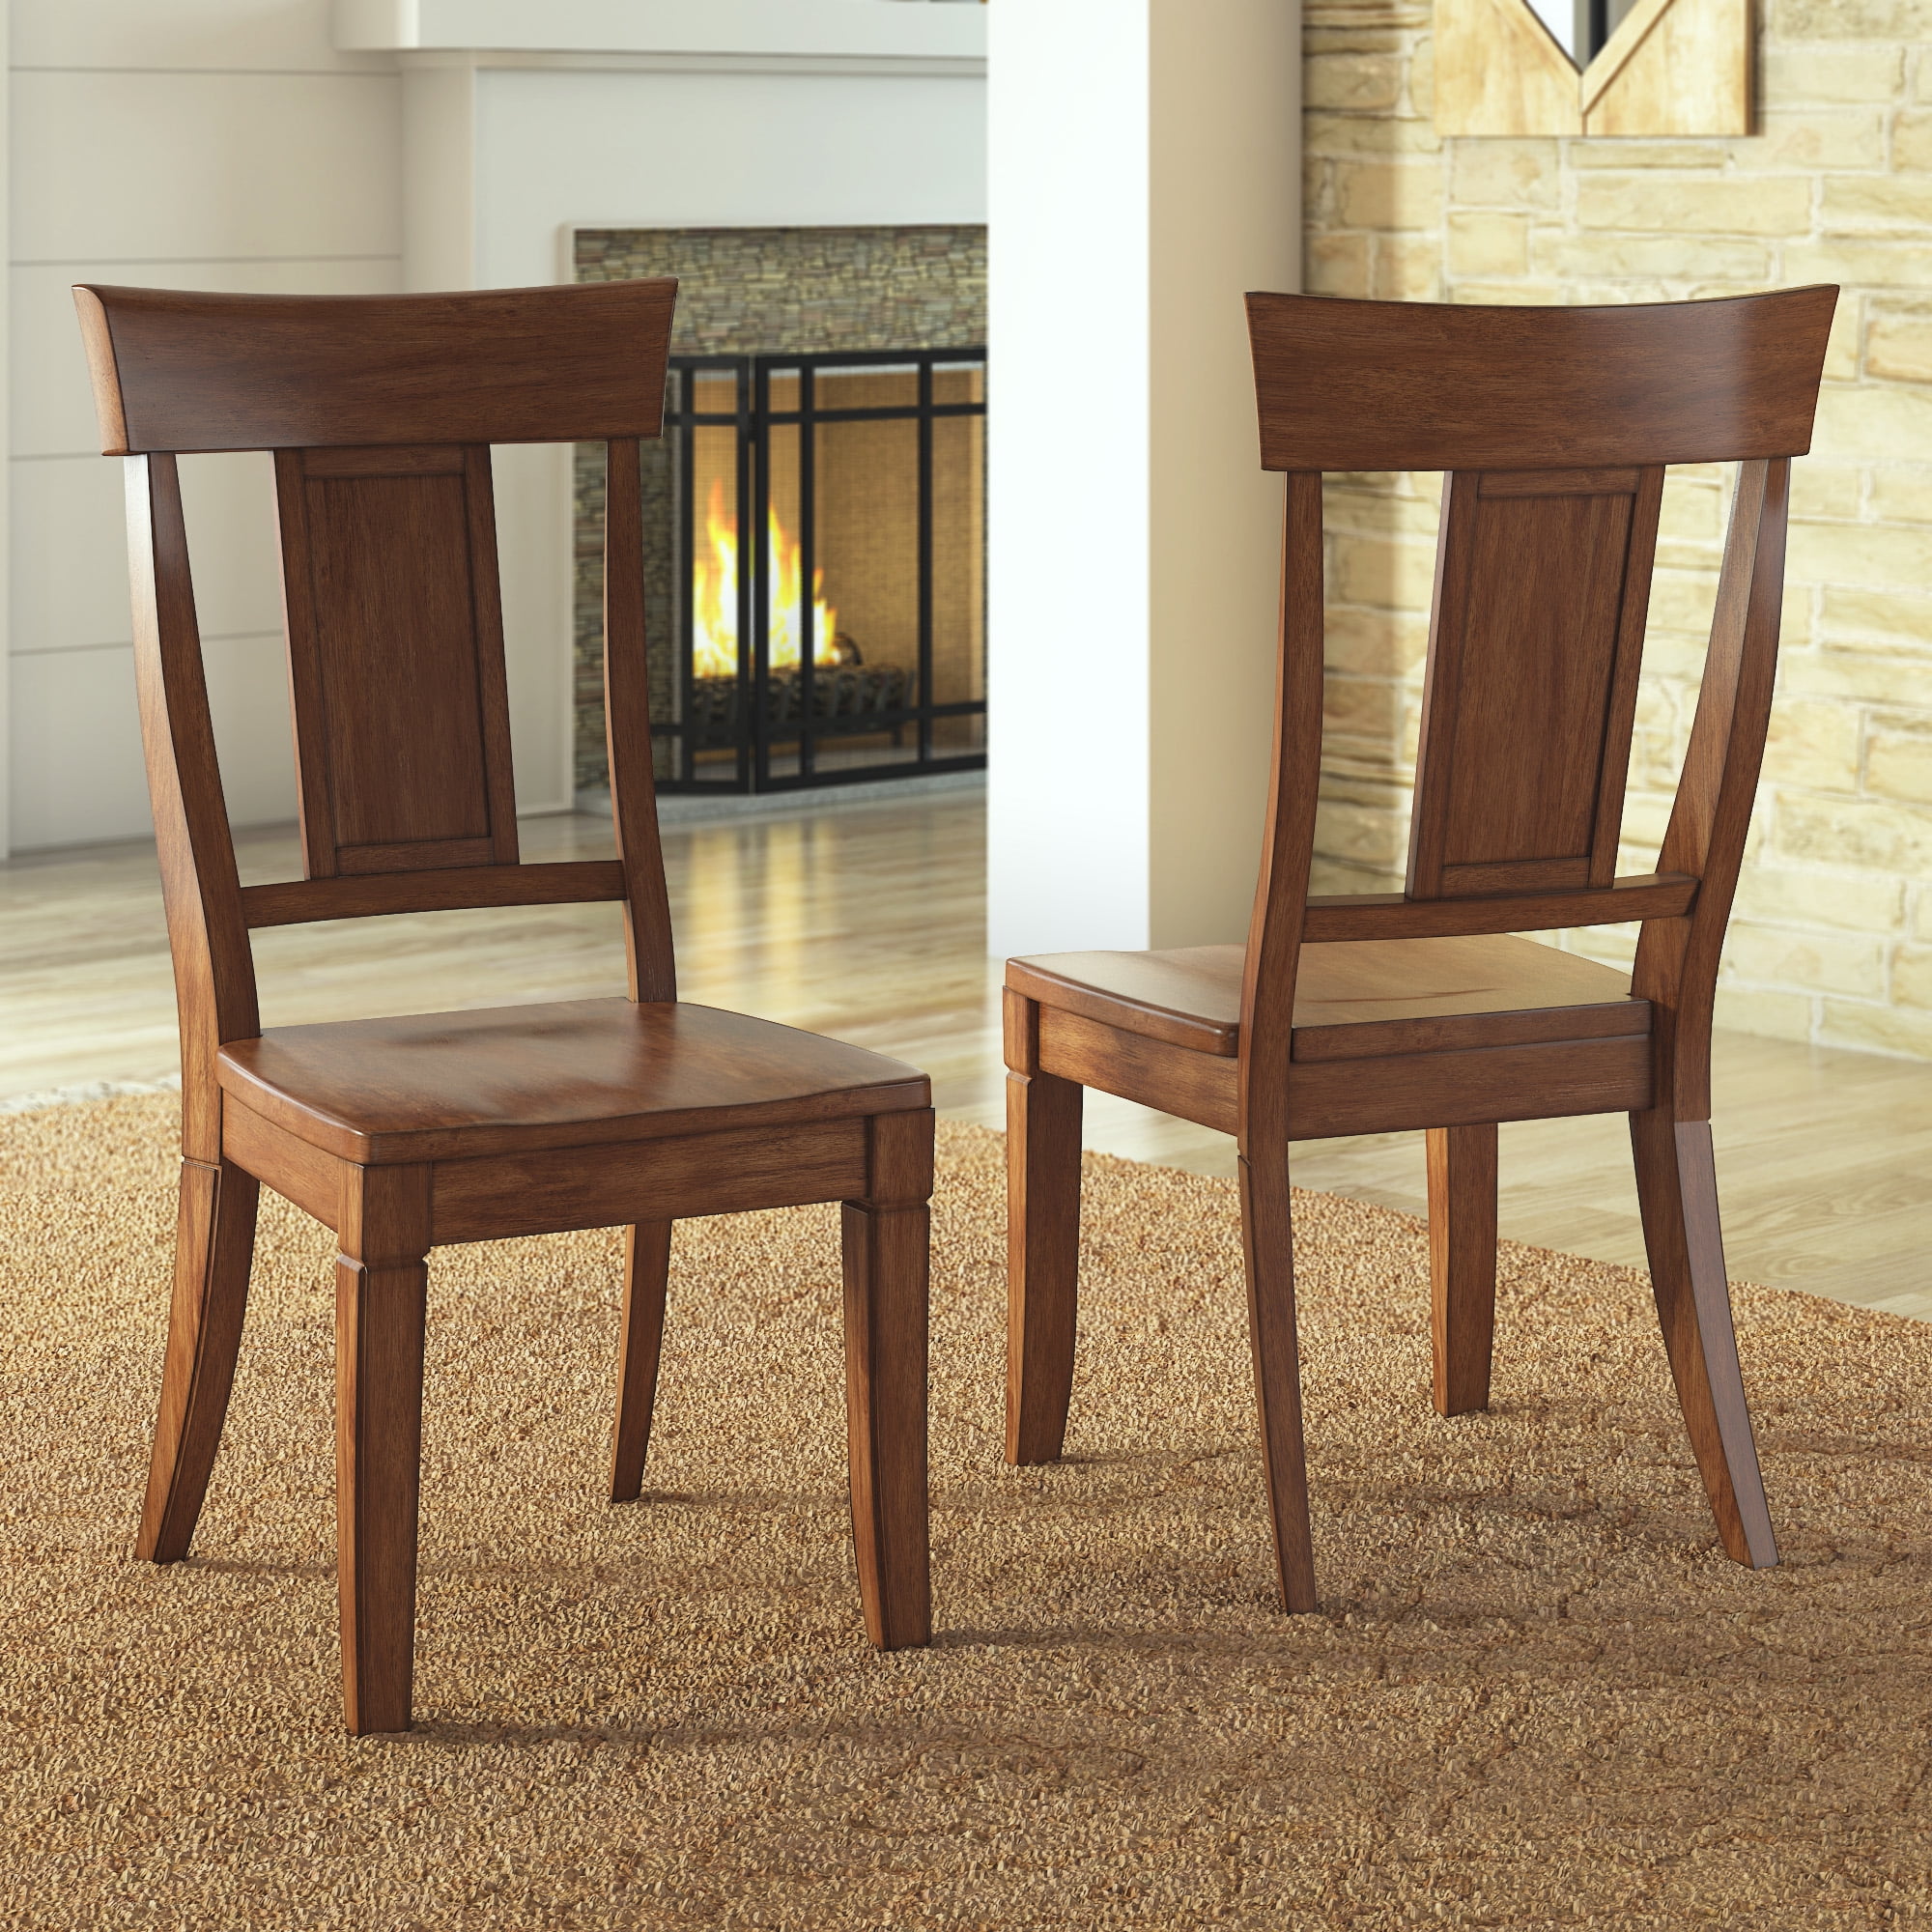 Weston Home Farmhouse Wood Dining Chair with Panel Back, Set of 2, Oka